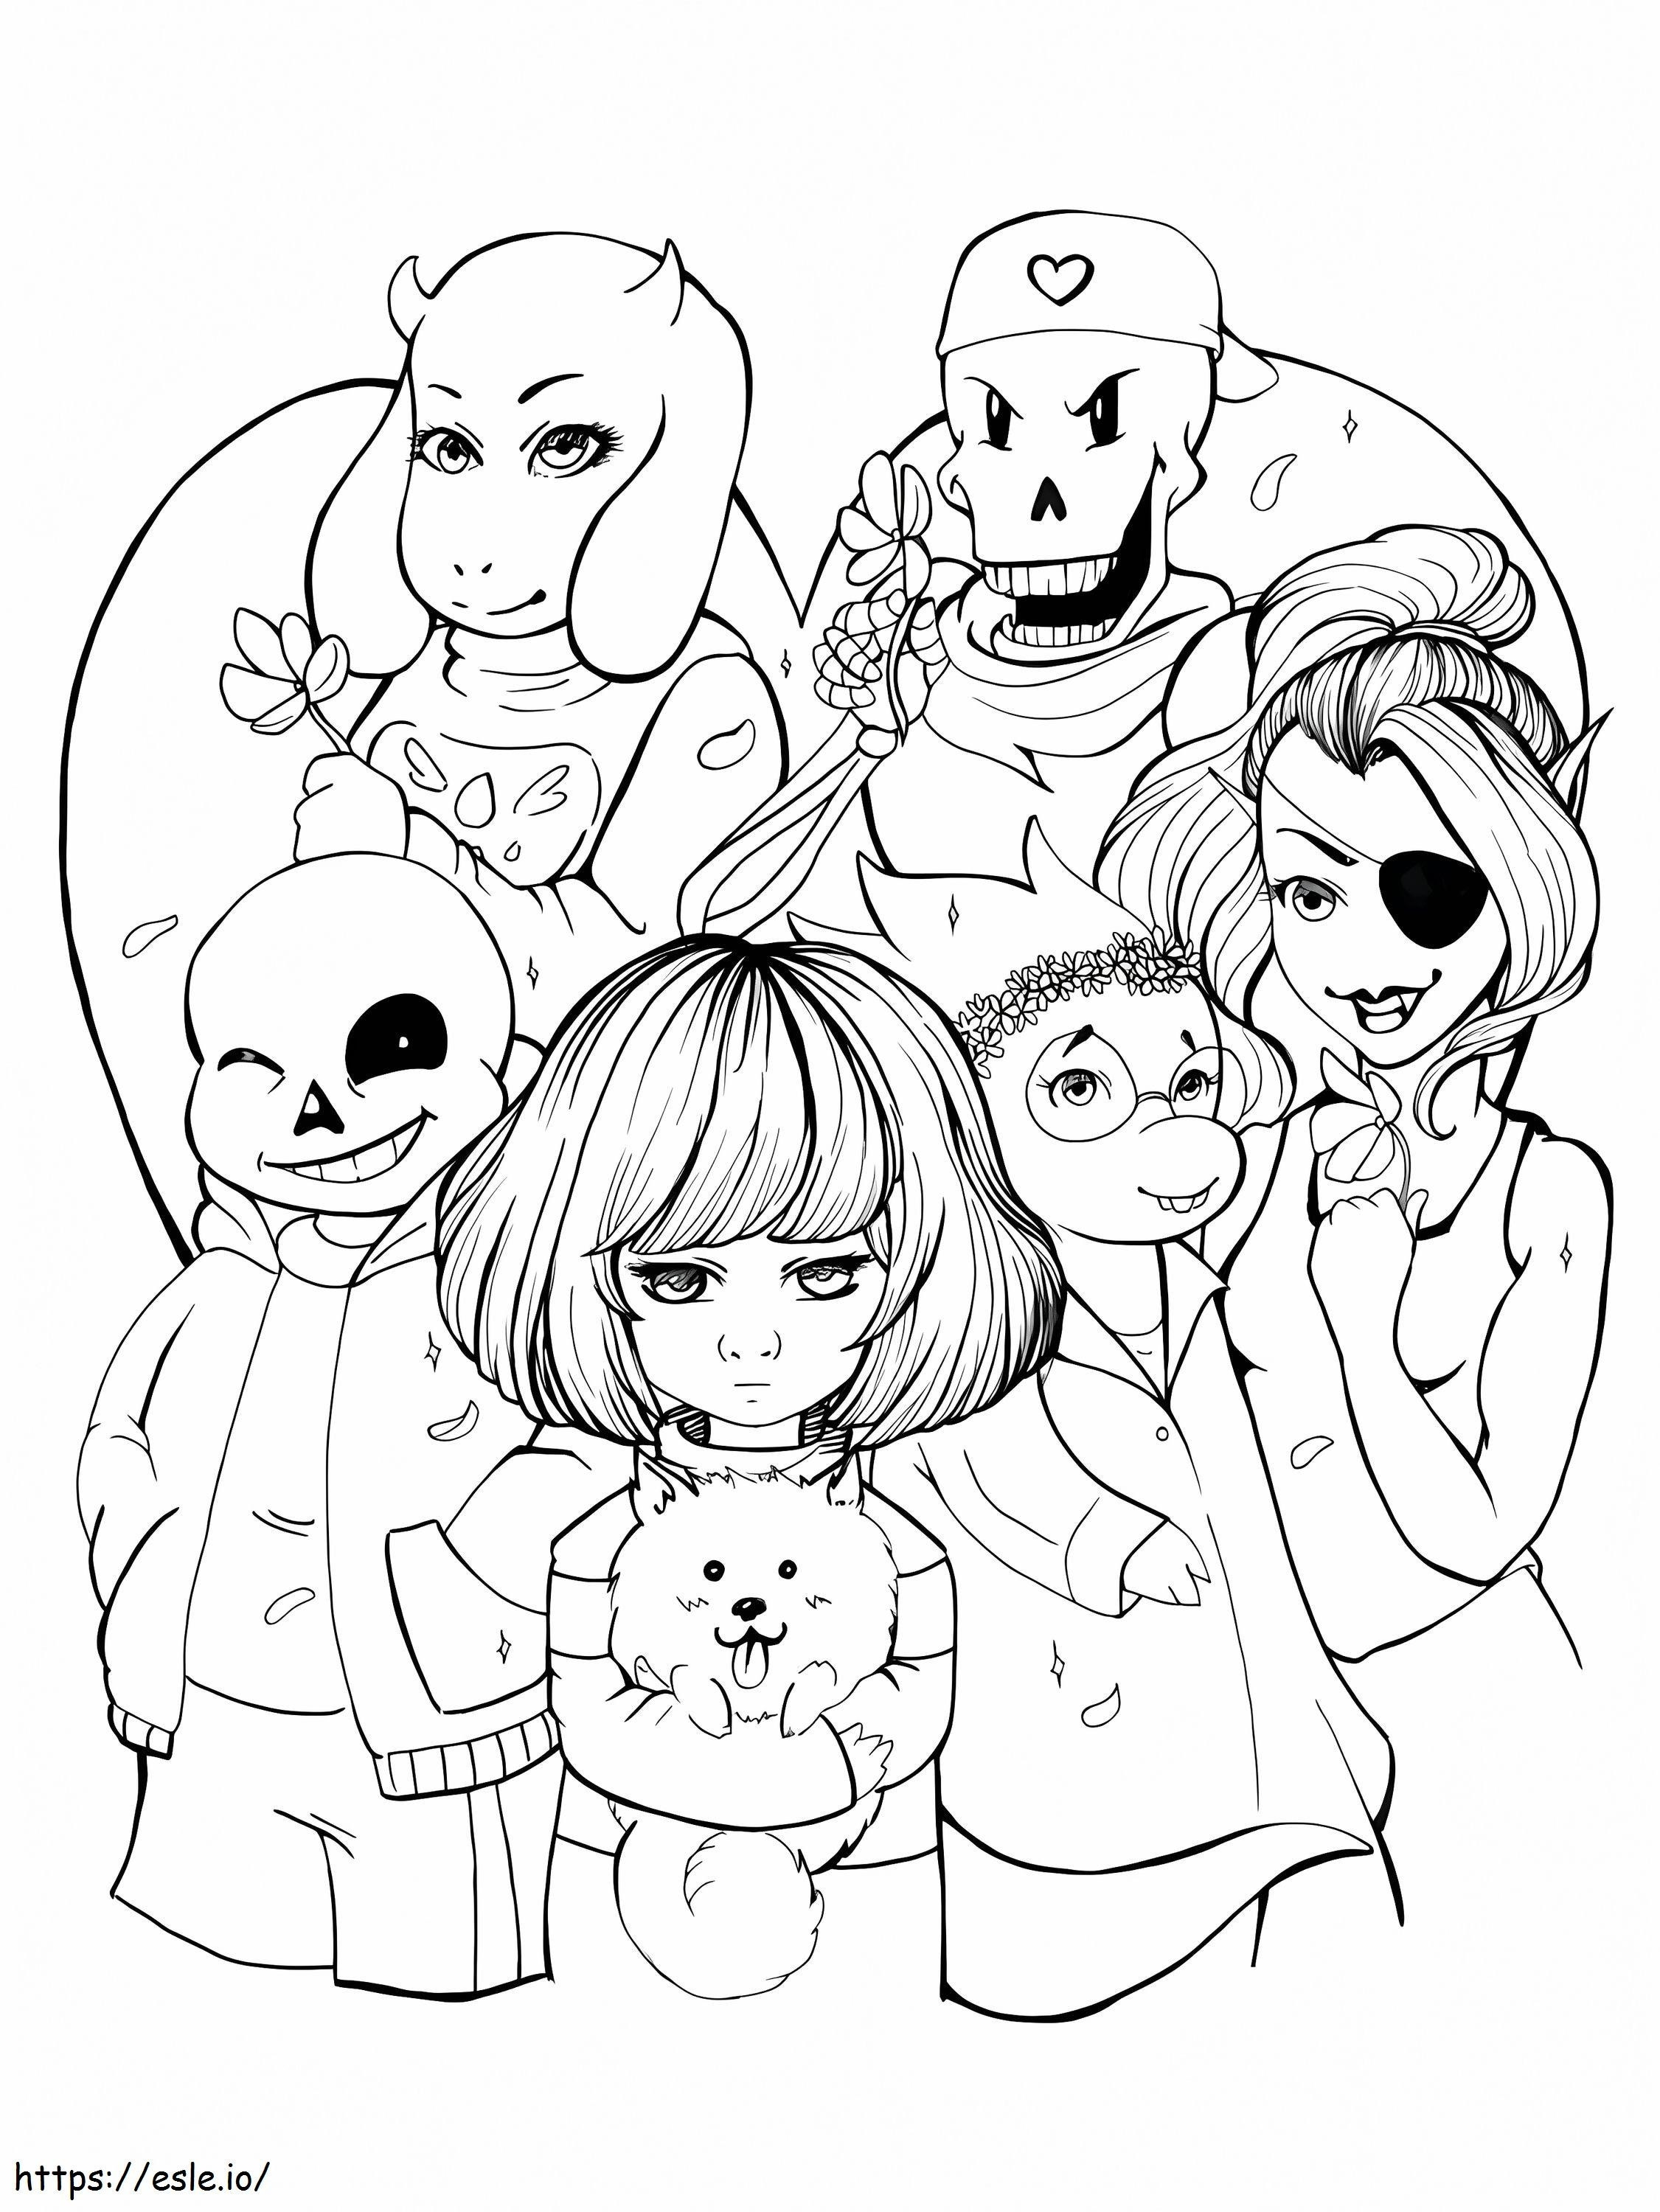 Undertales Characters 1 coloring page